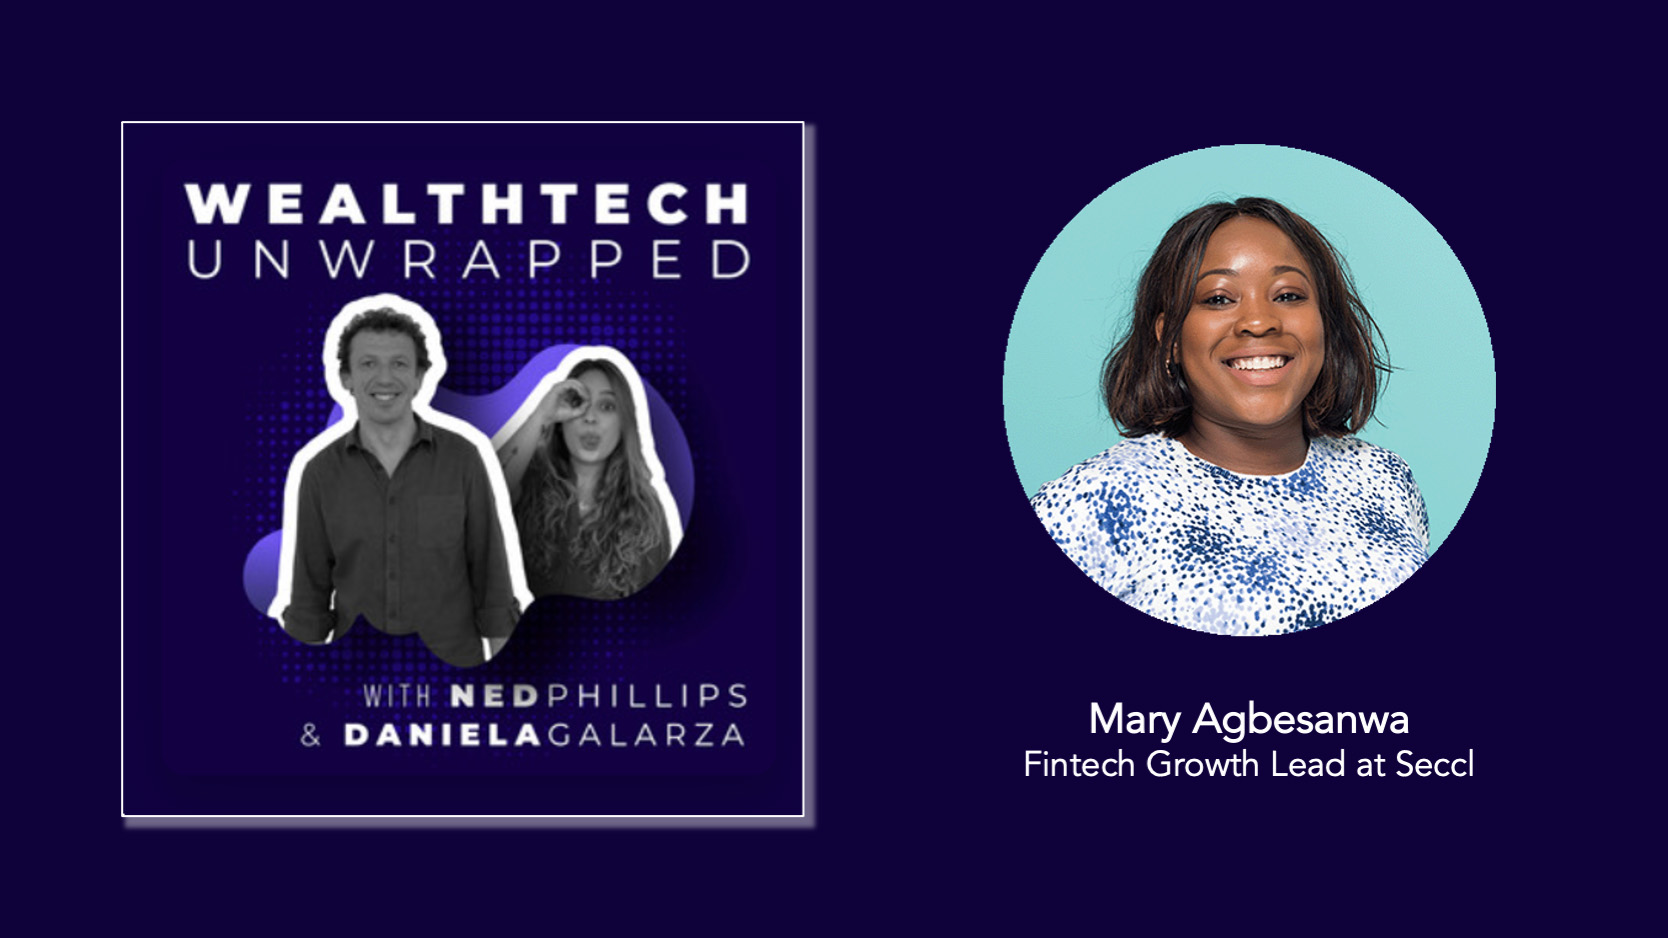 WealthTech UnWrapped - Embedded Finance and Financial Inclusion with Mary Kemi Agbesanwa